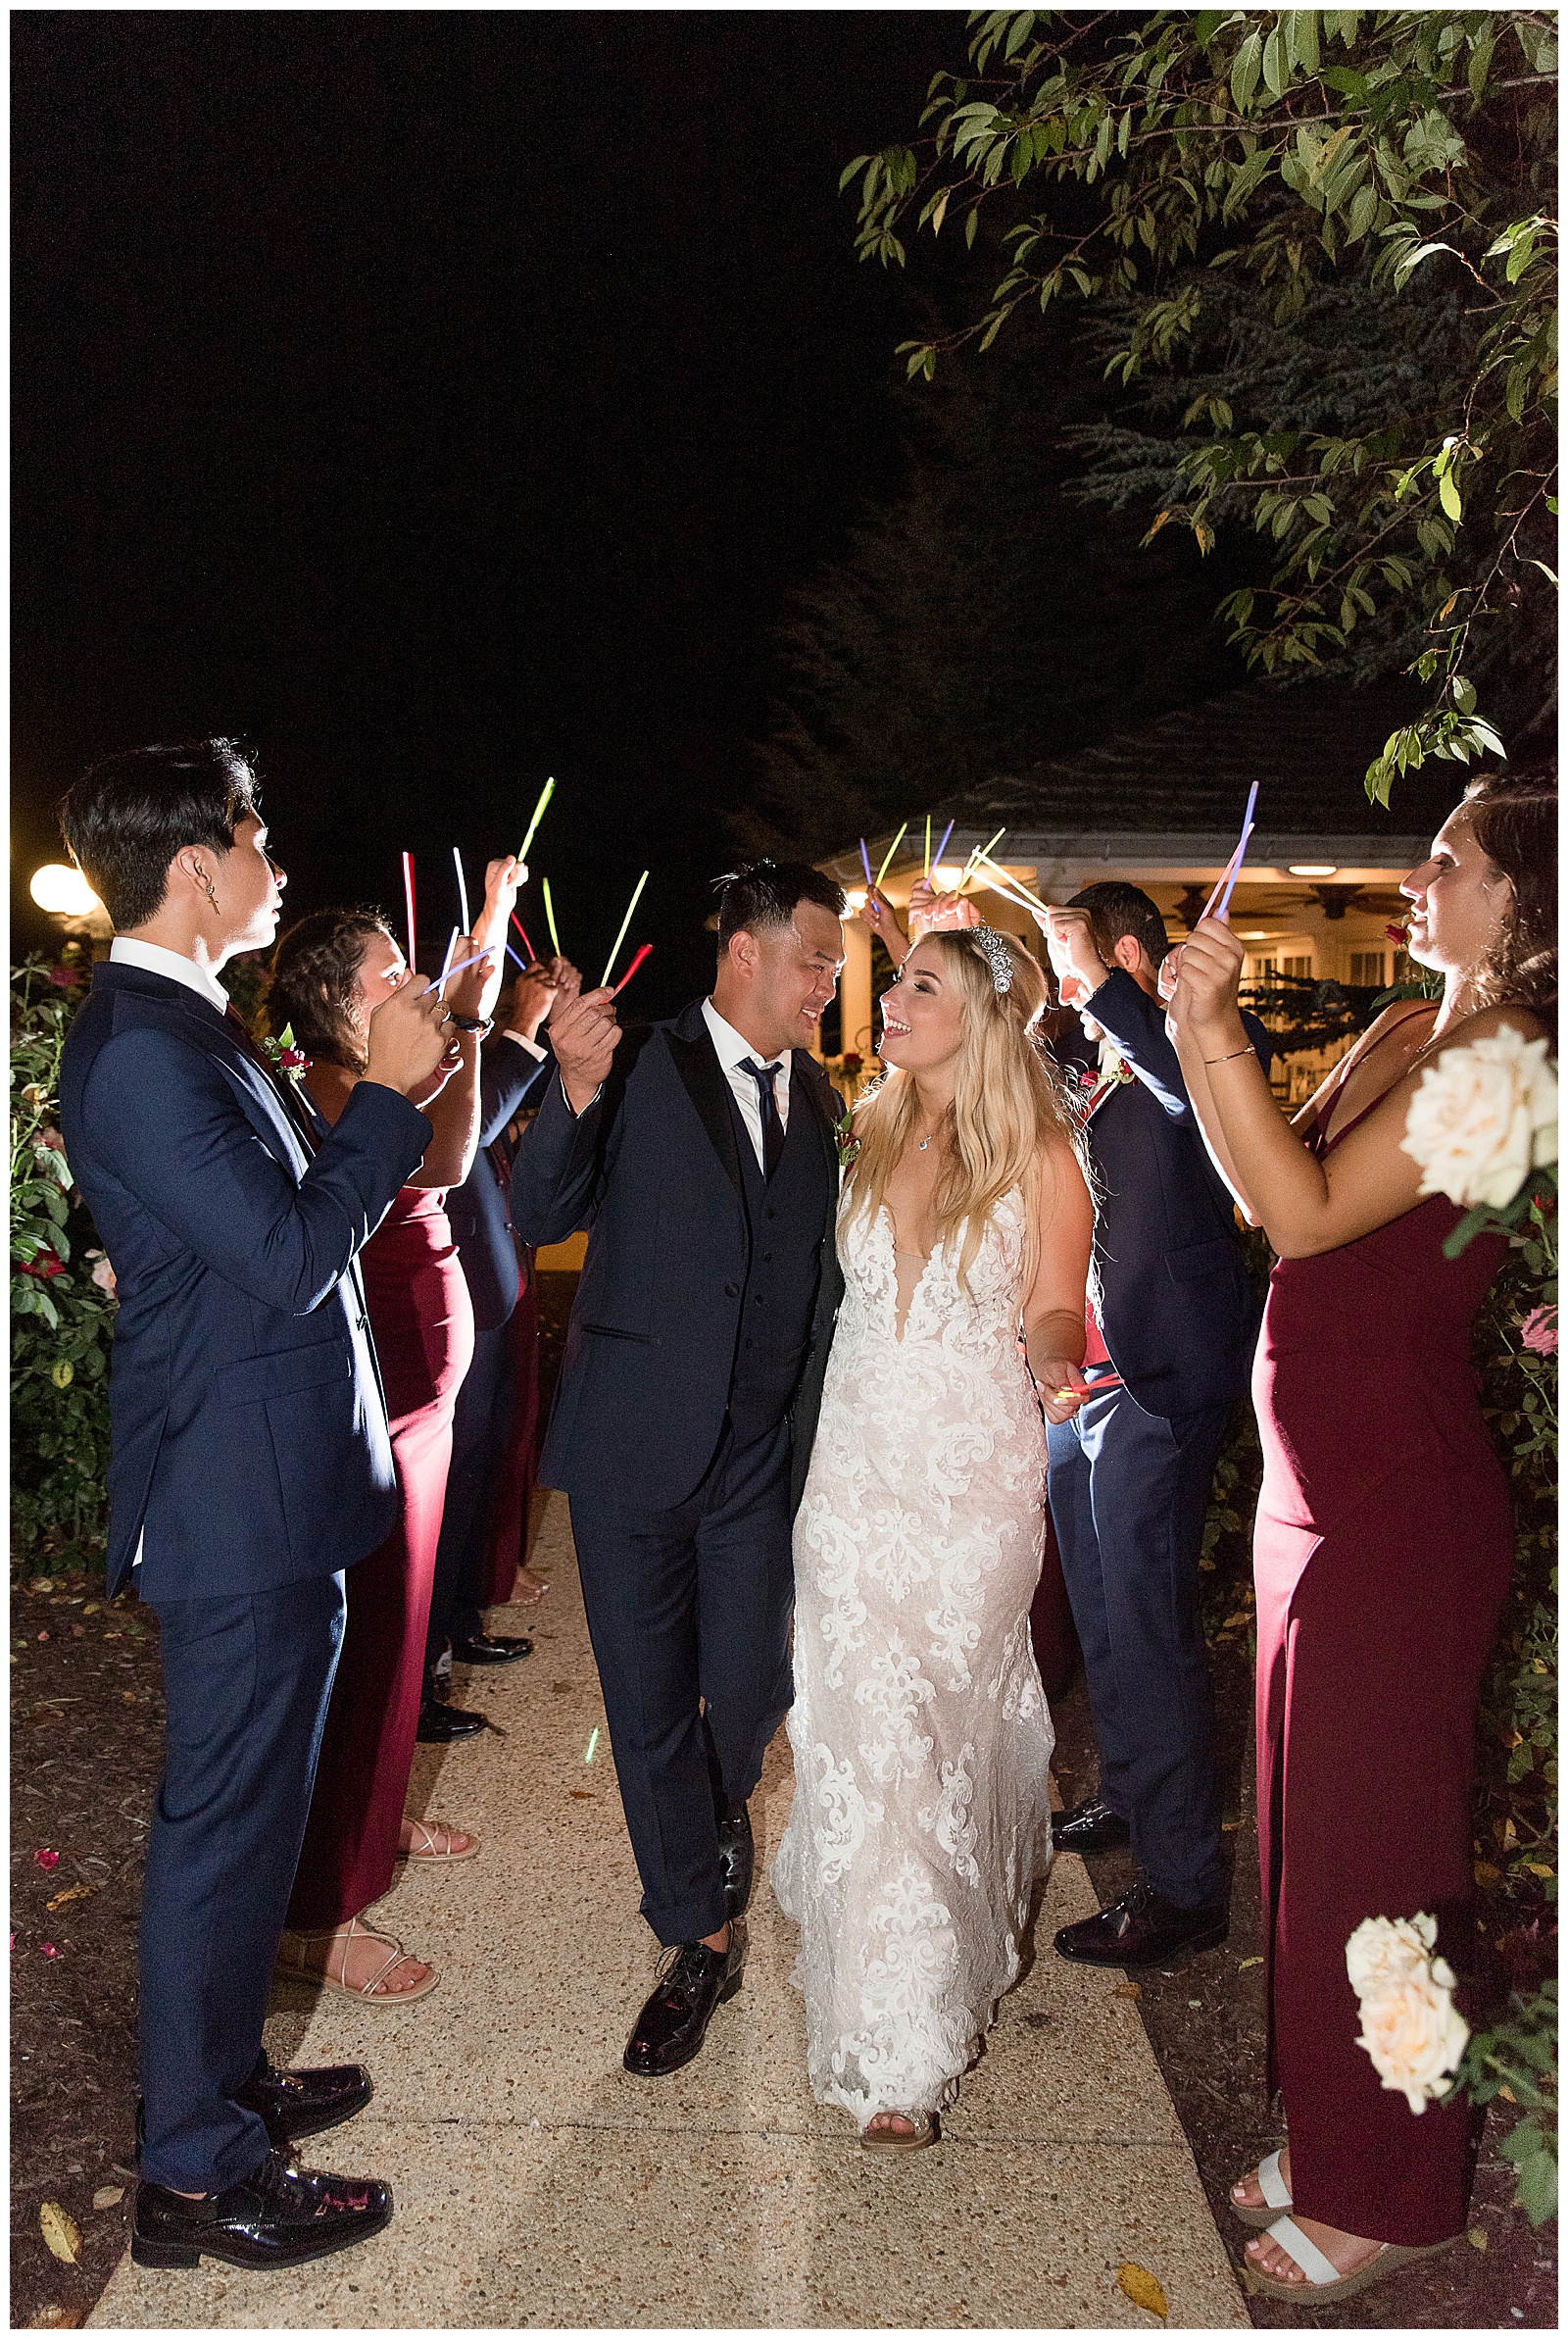 bride and groom leaving their wedding and reception with a sparkler send-off at nighttime at Antrim 1844 in Maryland